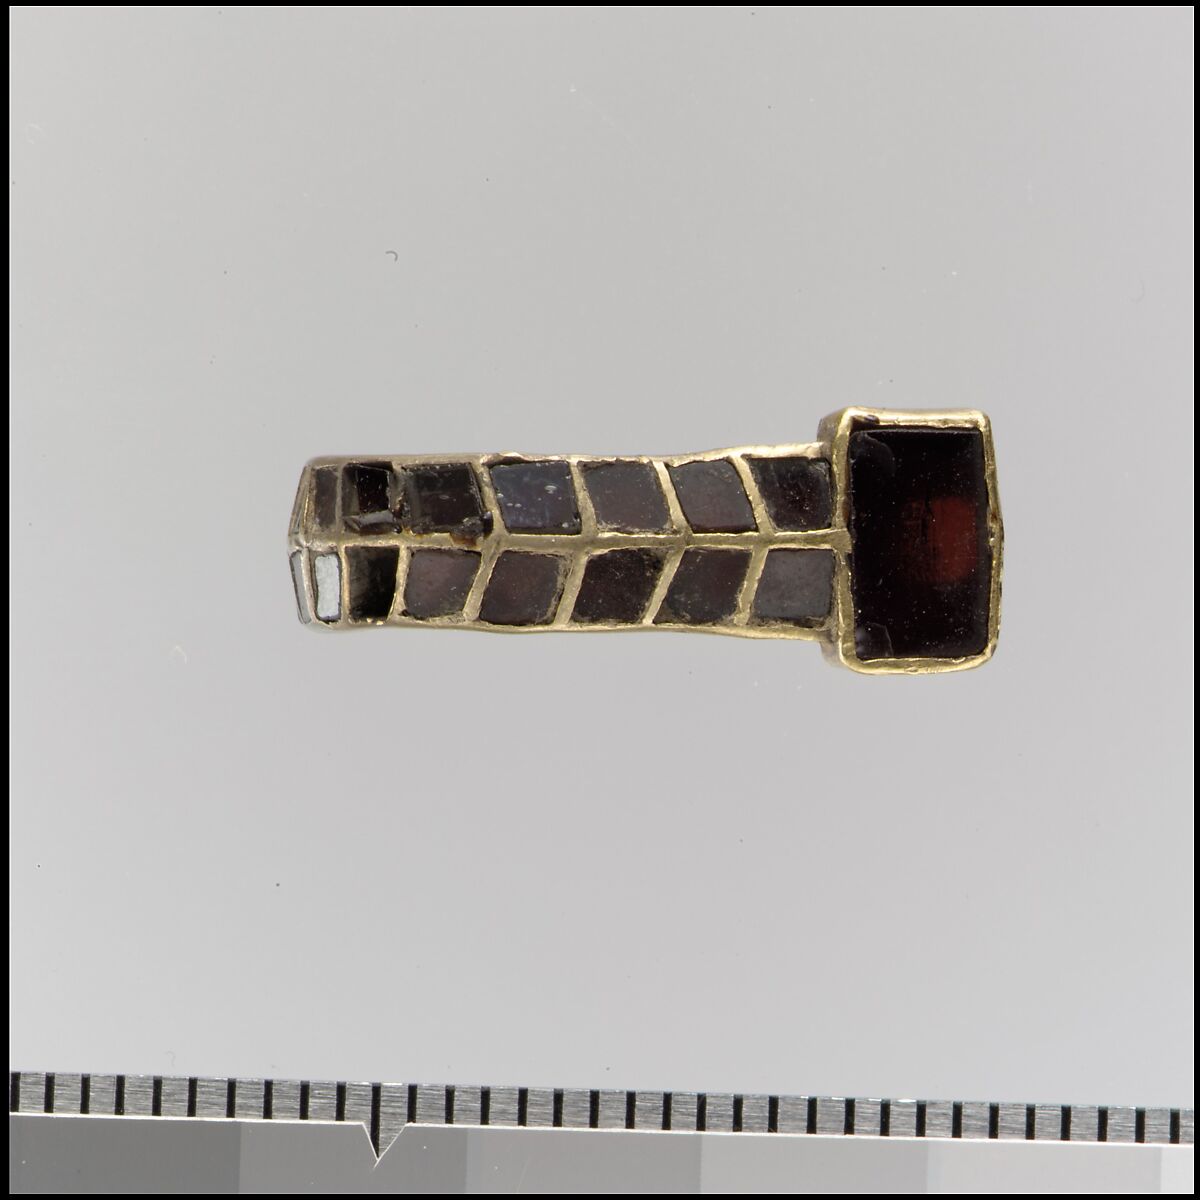 Tongue from a buckle, Gold, garnets, red glass., Ostrogothic